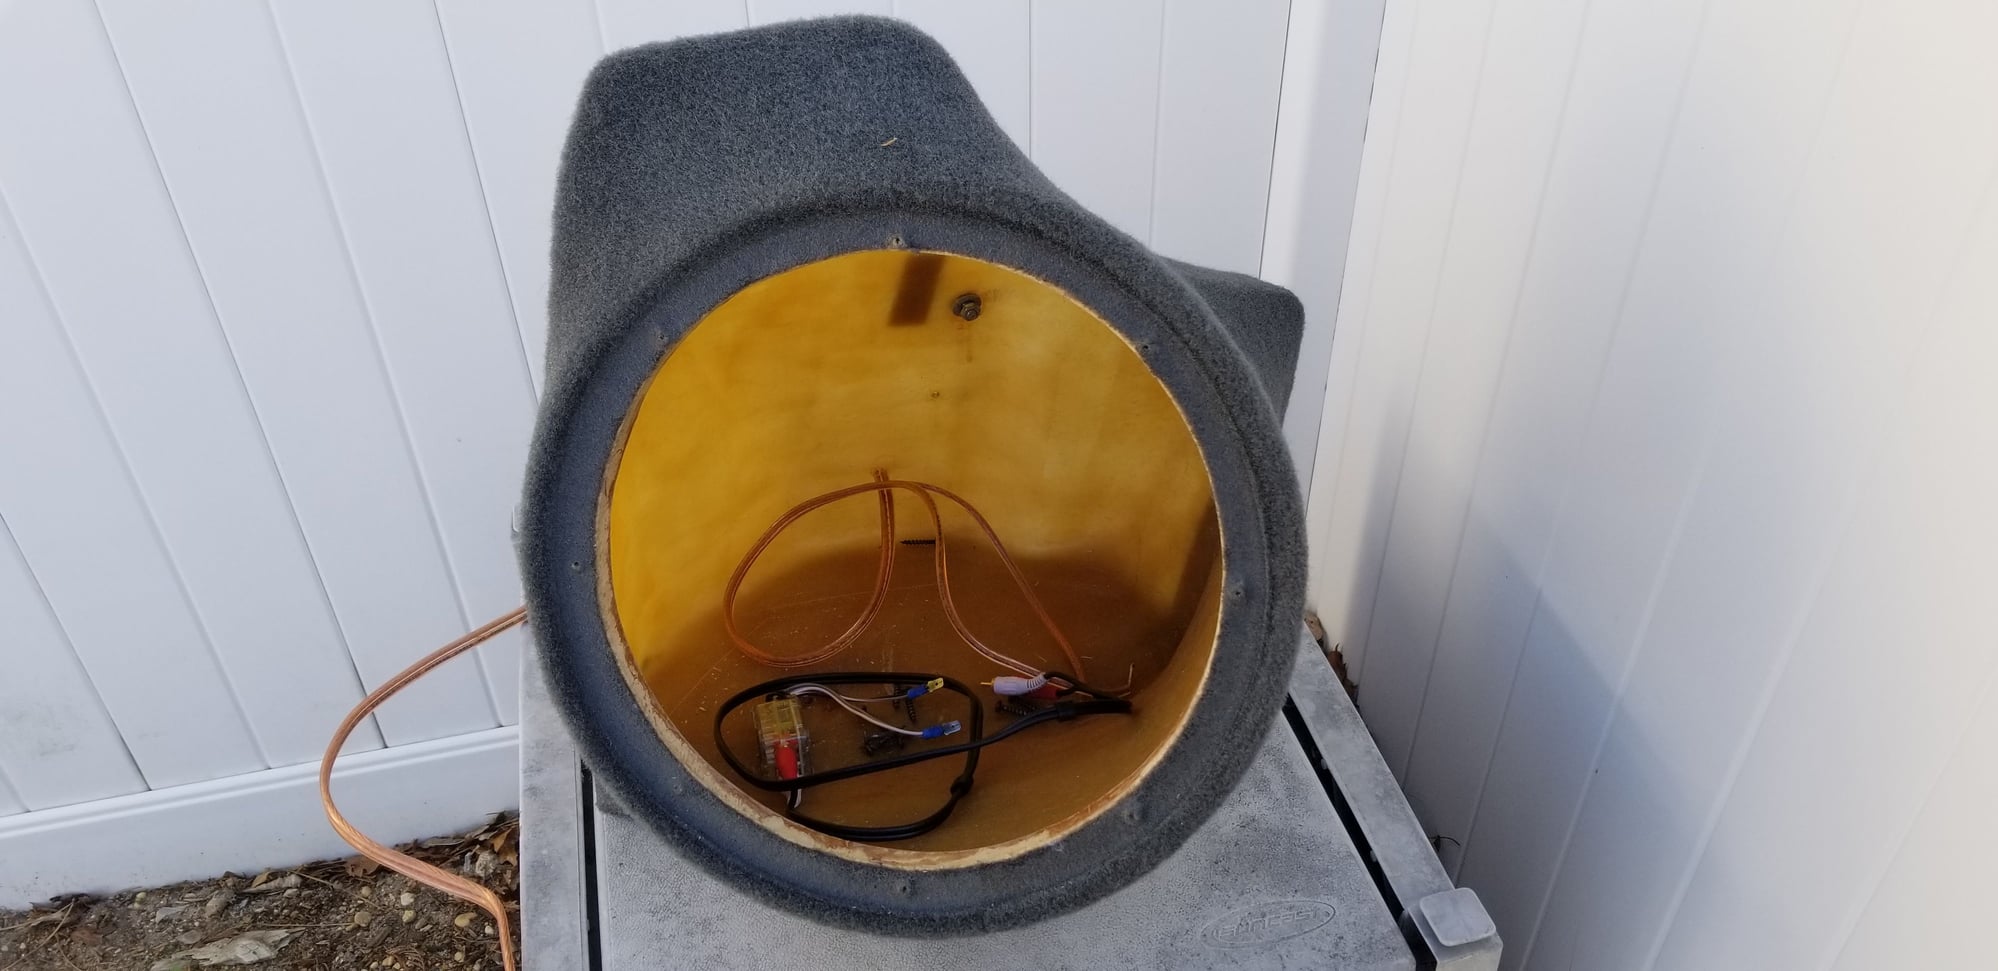 Audio Video/Electronics - FS: 3GTL 12" Fiberglass Subwoofer Box (Driver side) - Used - 2004 to 2008 Acura TL - Toms River Or Union, NJ 08757, United States